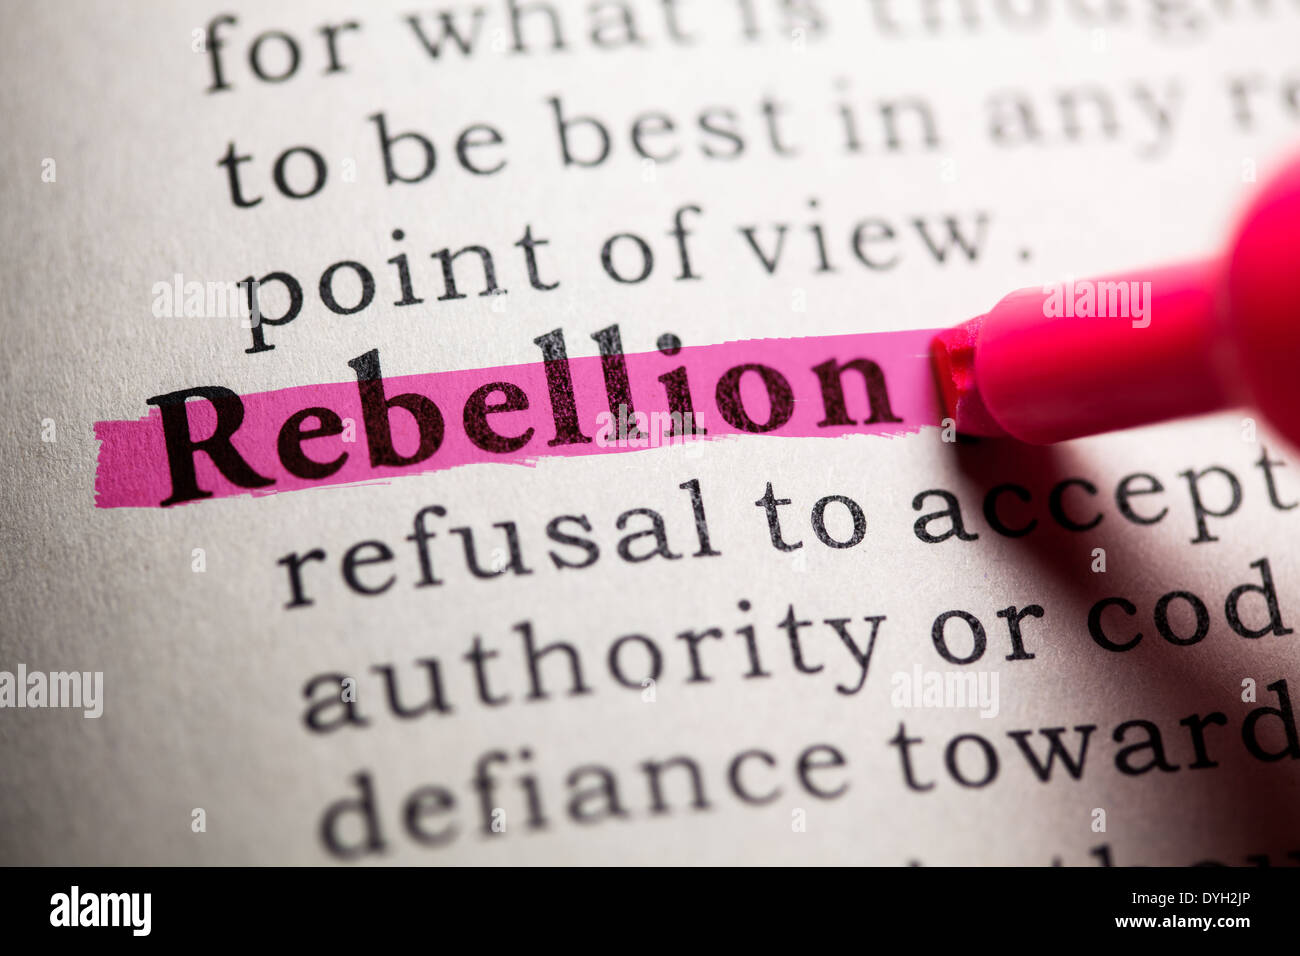 Fake Dictionary, Dictionary definition of the word rebellion. Stock Photo